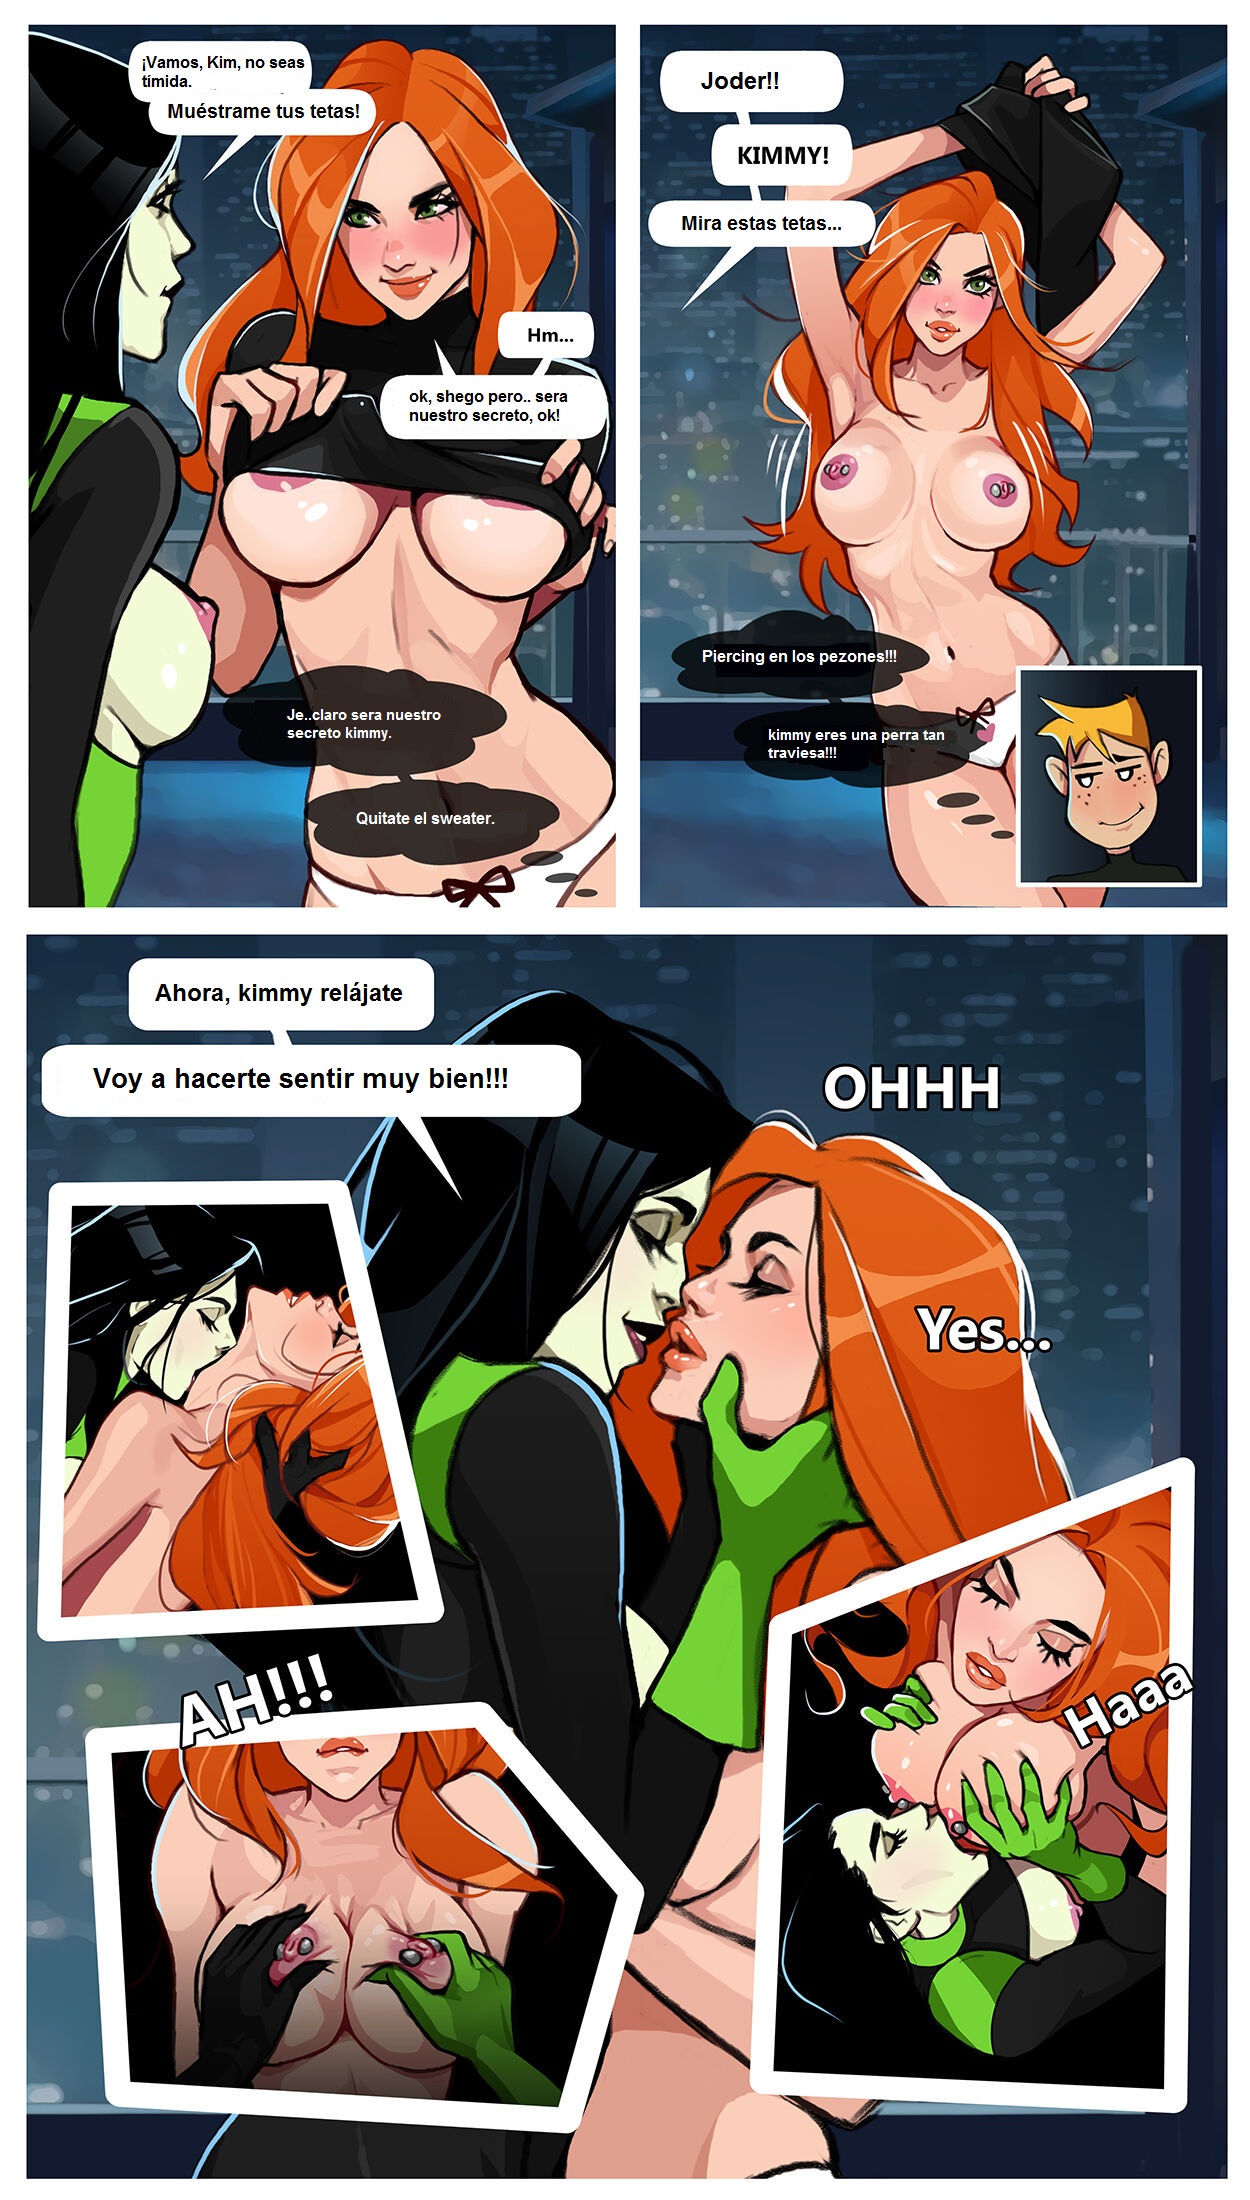 Kim and Shego Date on the roof image number 4